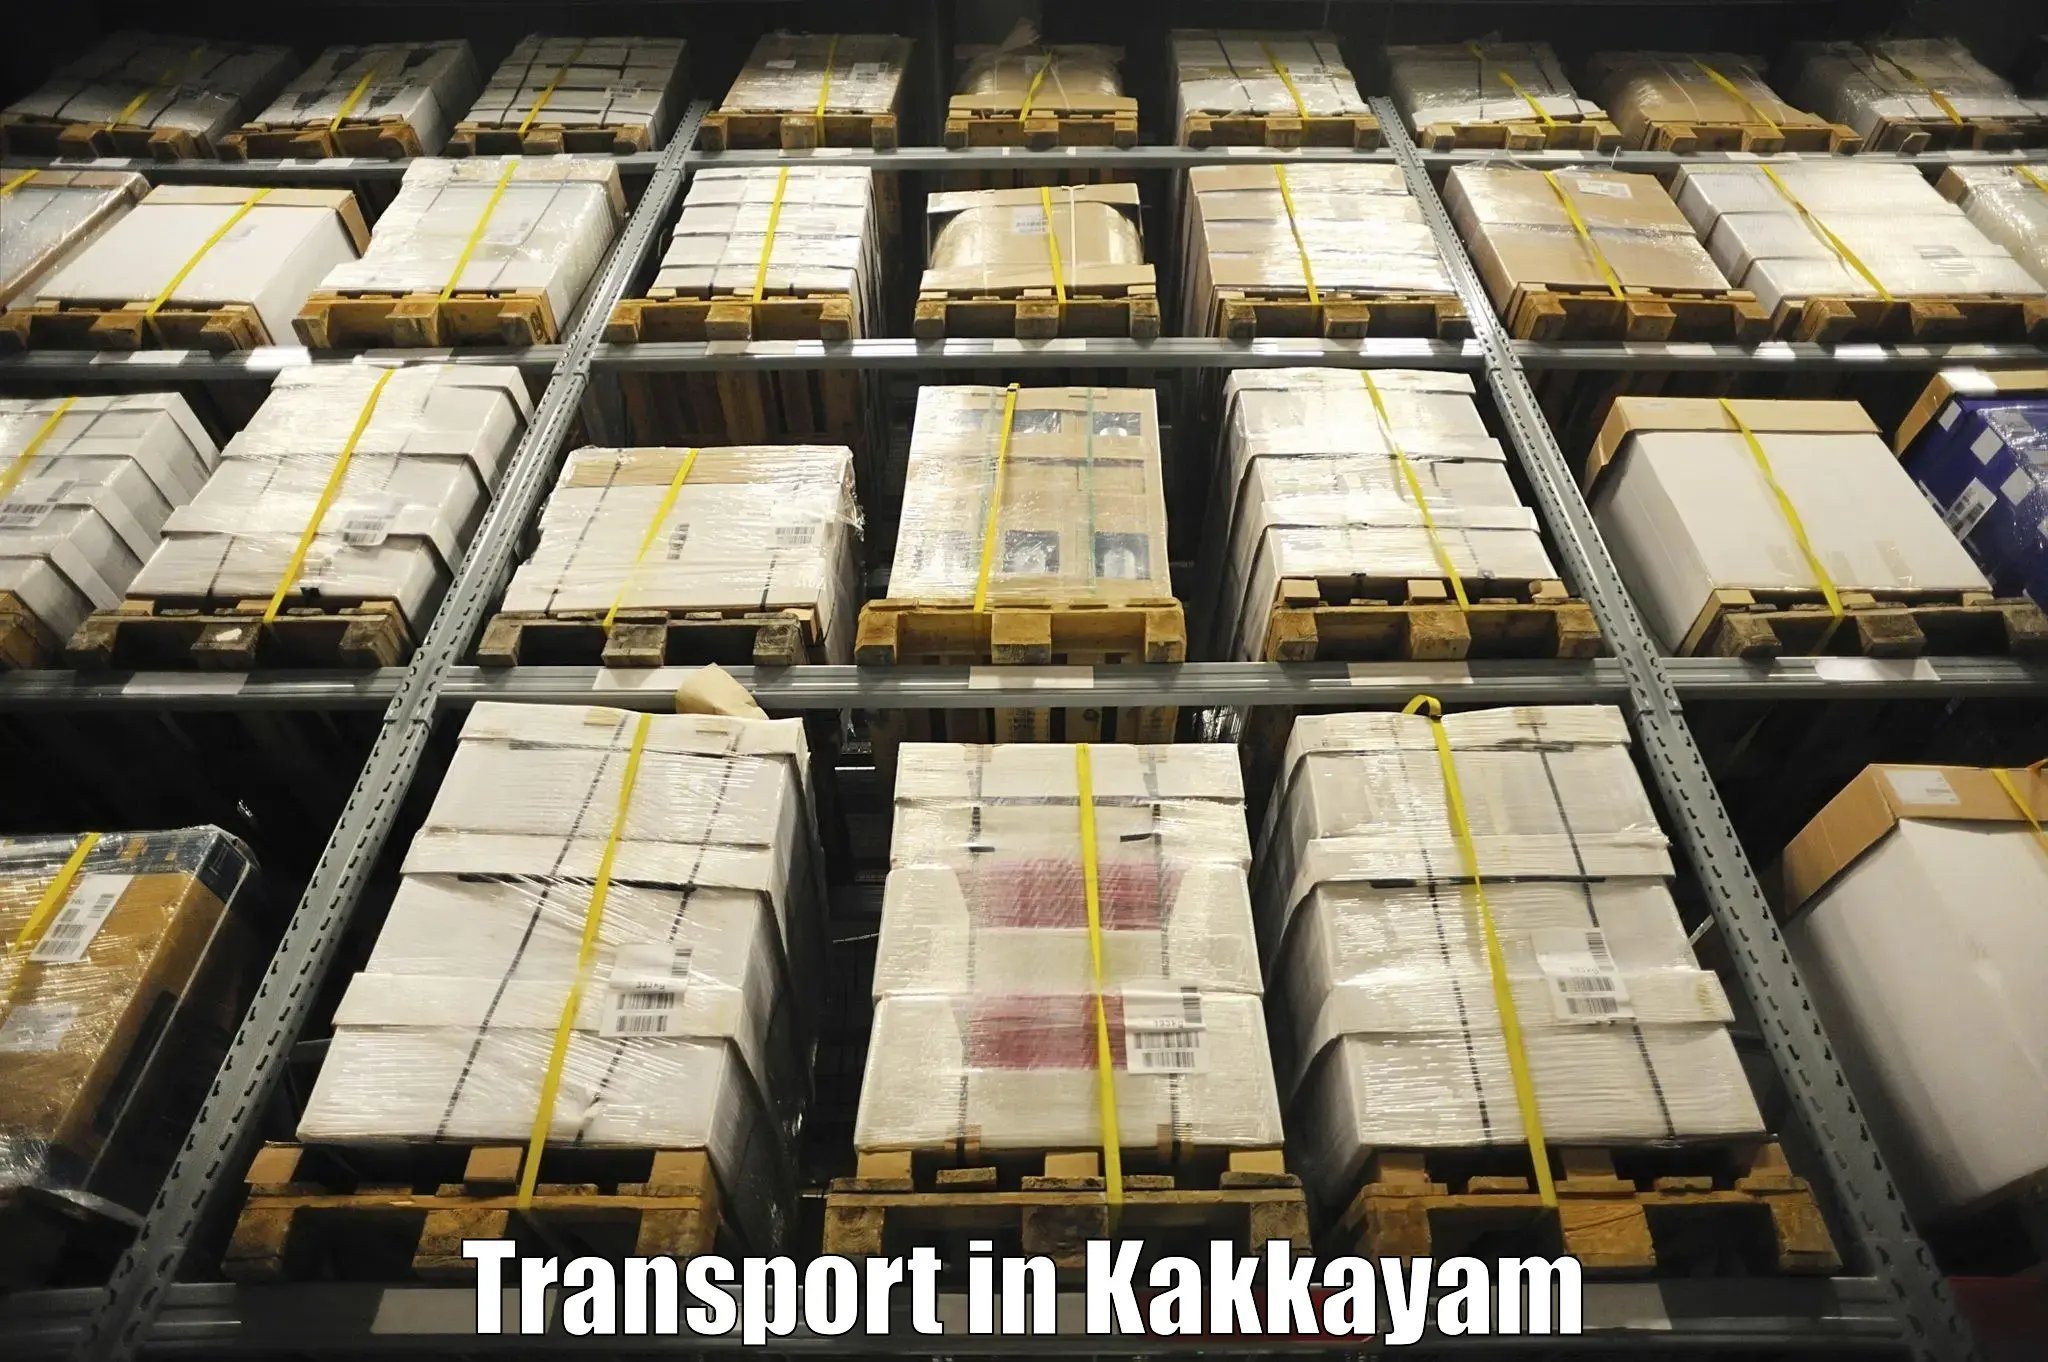 Package delivery services in Kakkayam